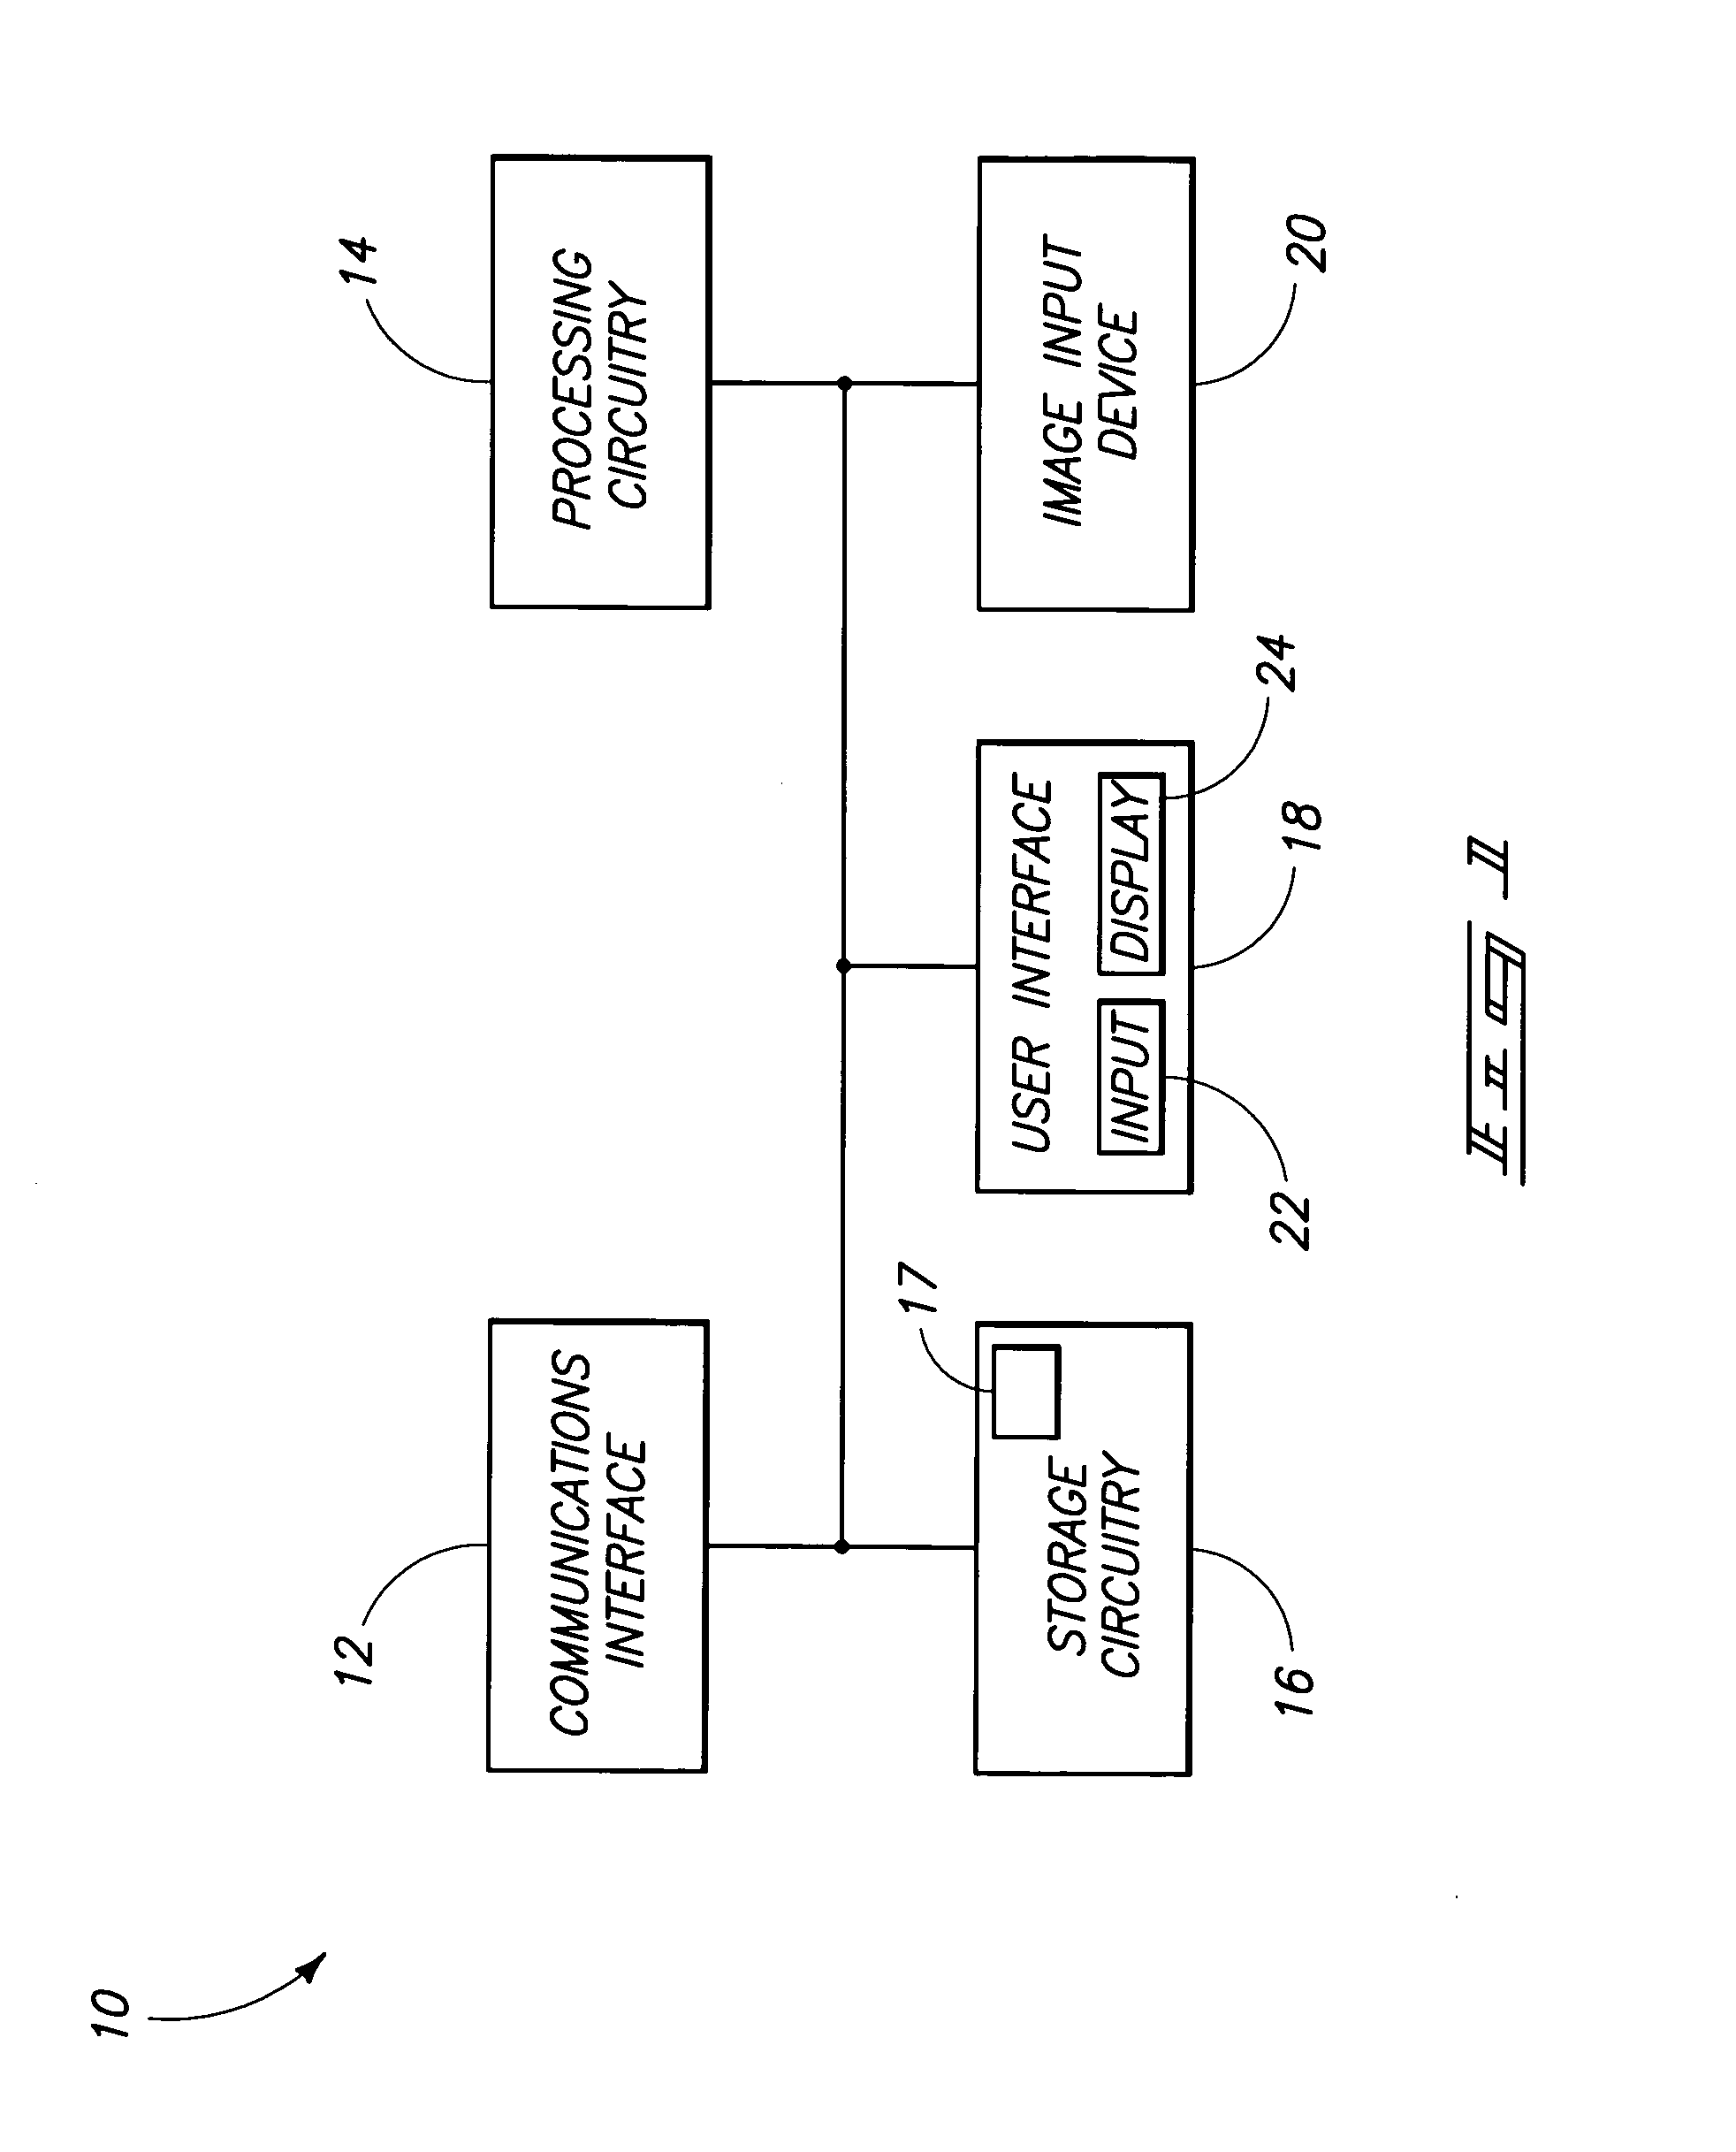 Image processing methods, image management systems, and articles of manufacture